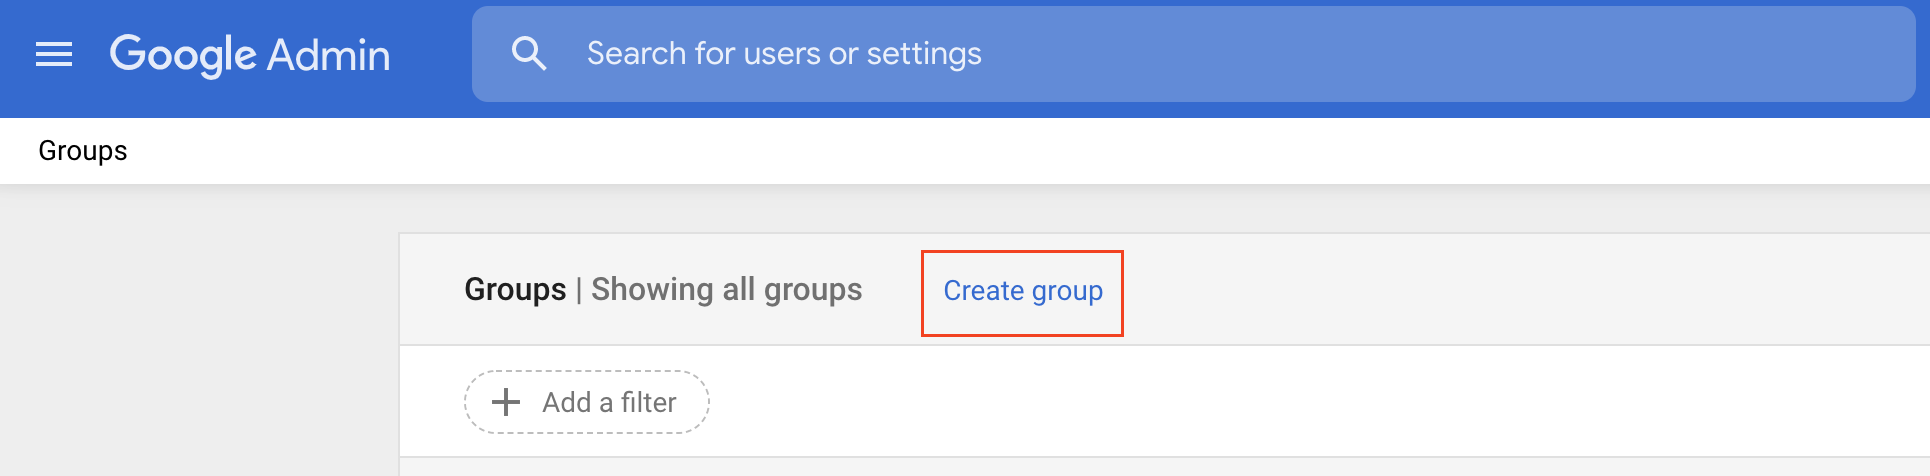 Creating a group in Google Groups.